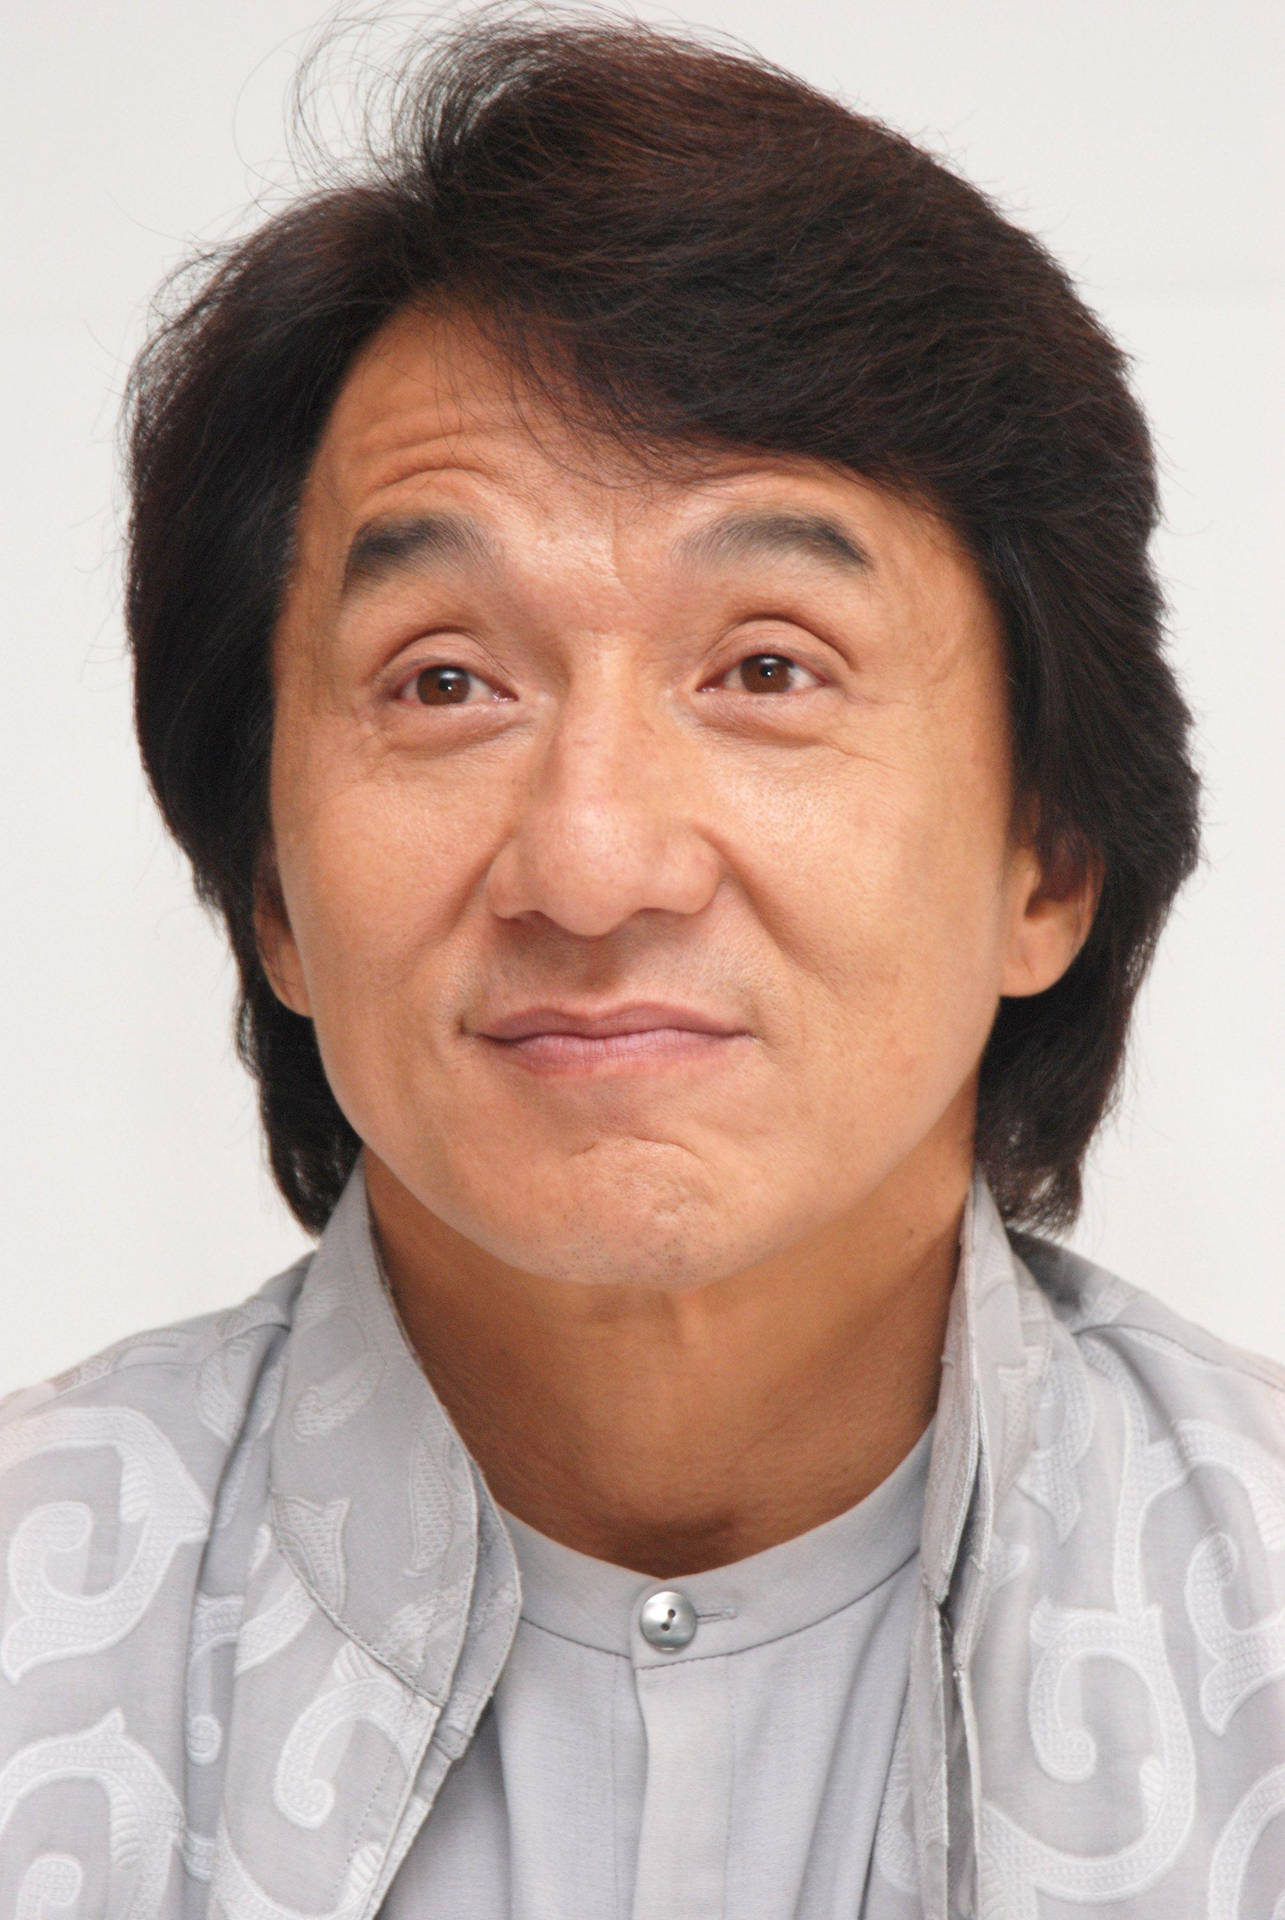 Jackie Chan Photos HD Latest Images Pictures Stills of Jackie Chan   FilmiBeat